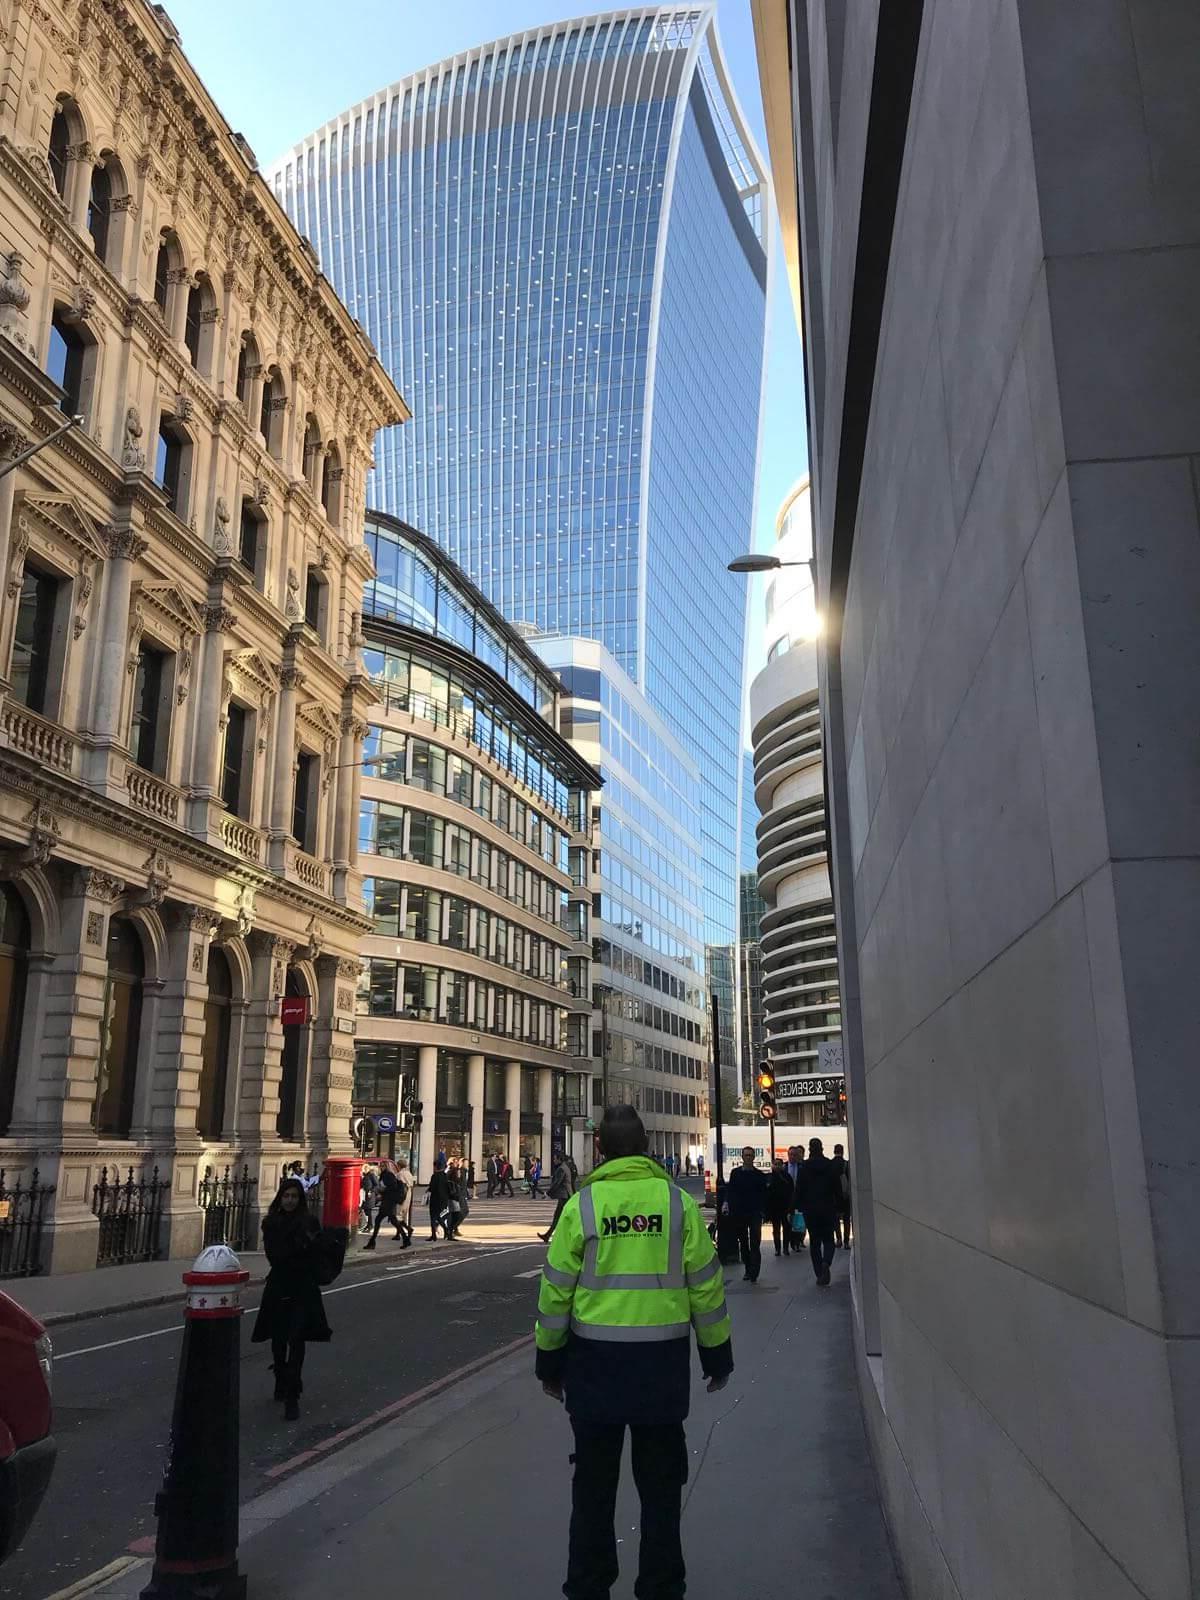 A Rock Power Connections employee in a hi vis jacket, looking up at a London skyscraper building